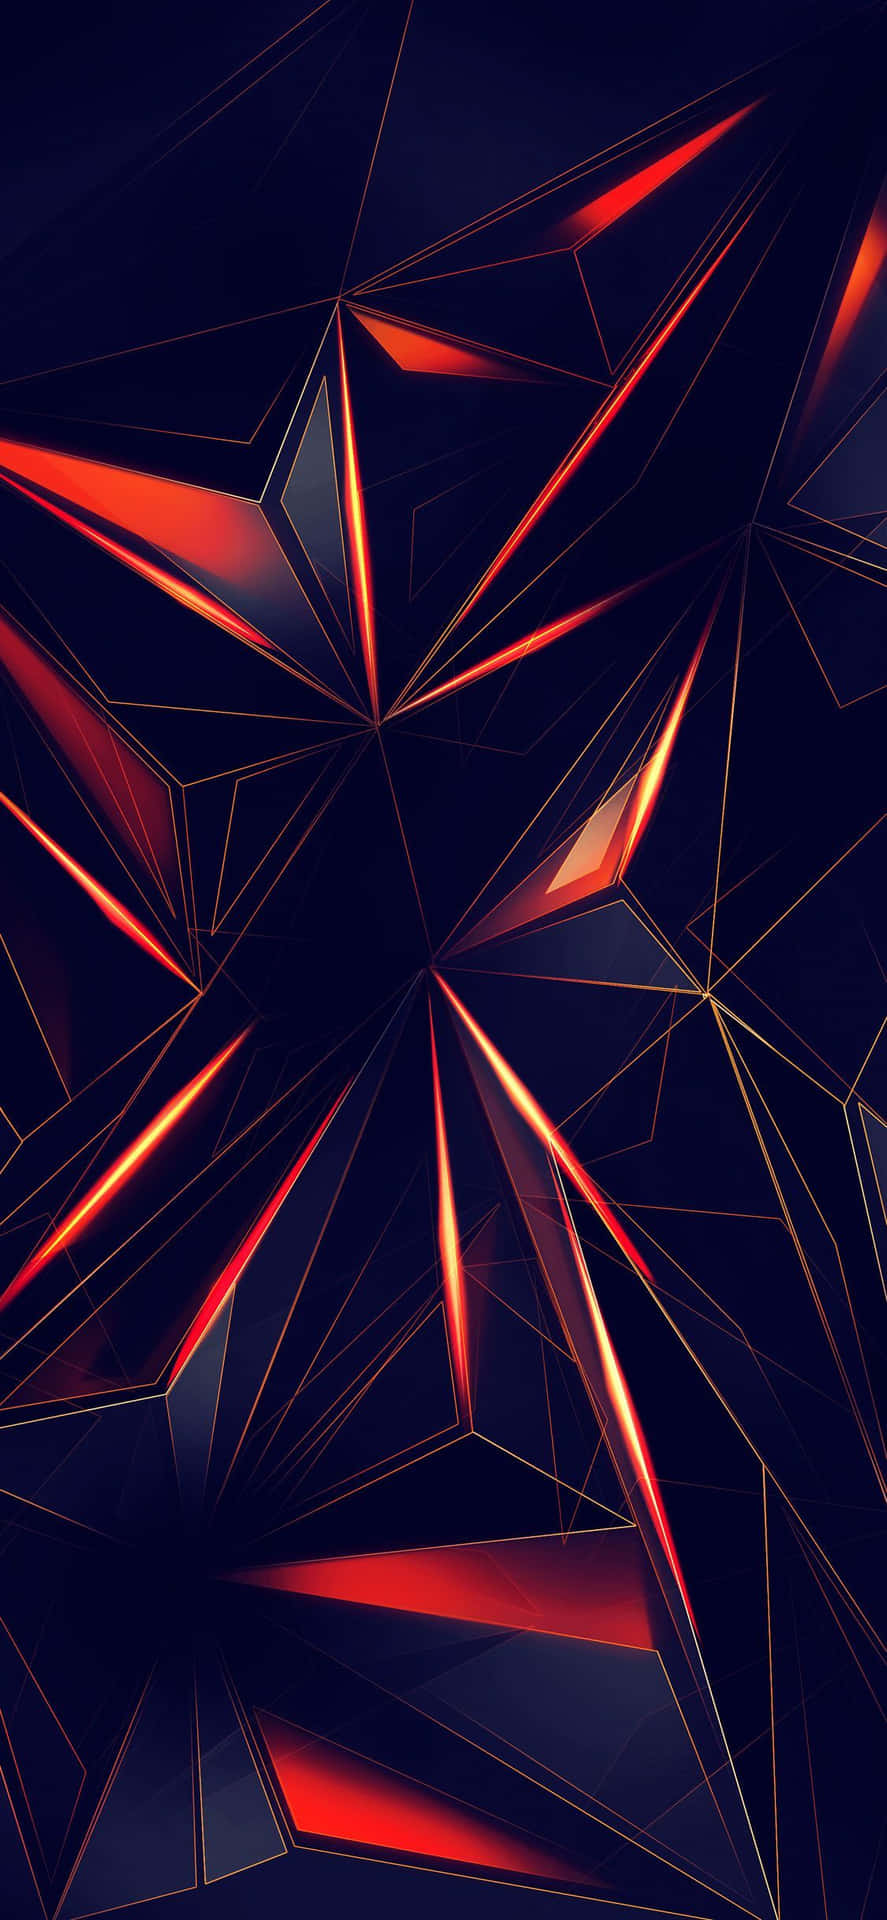 Get the latest in technology with this bold red and blue iPhone Wallpaper